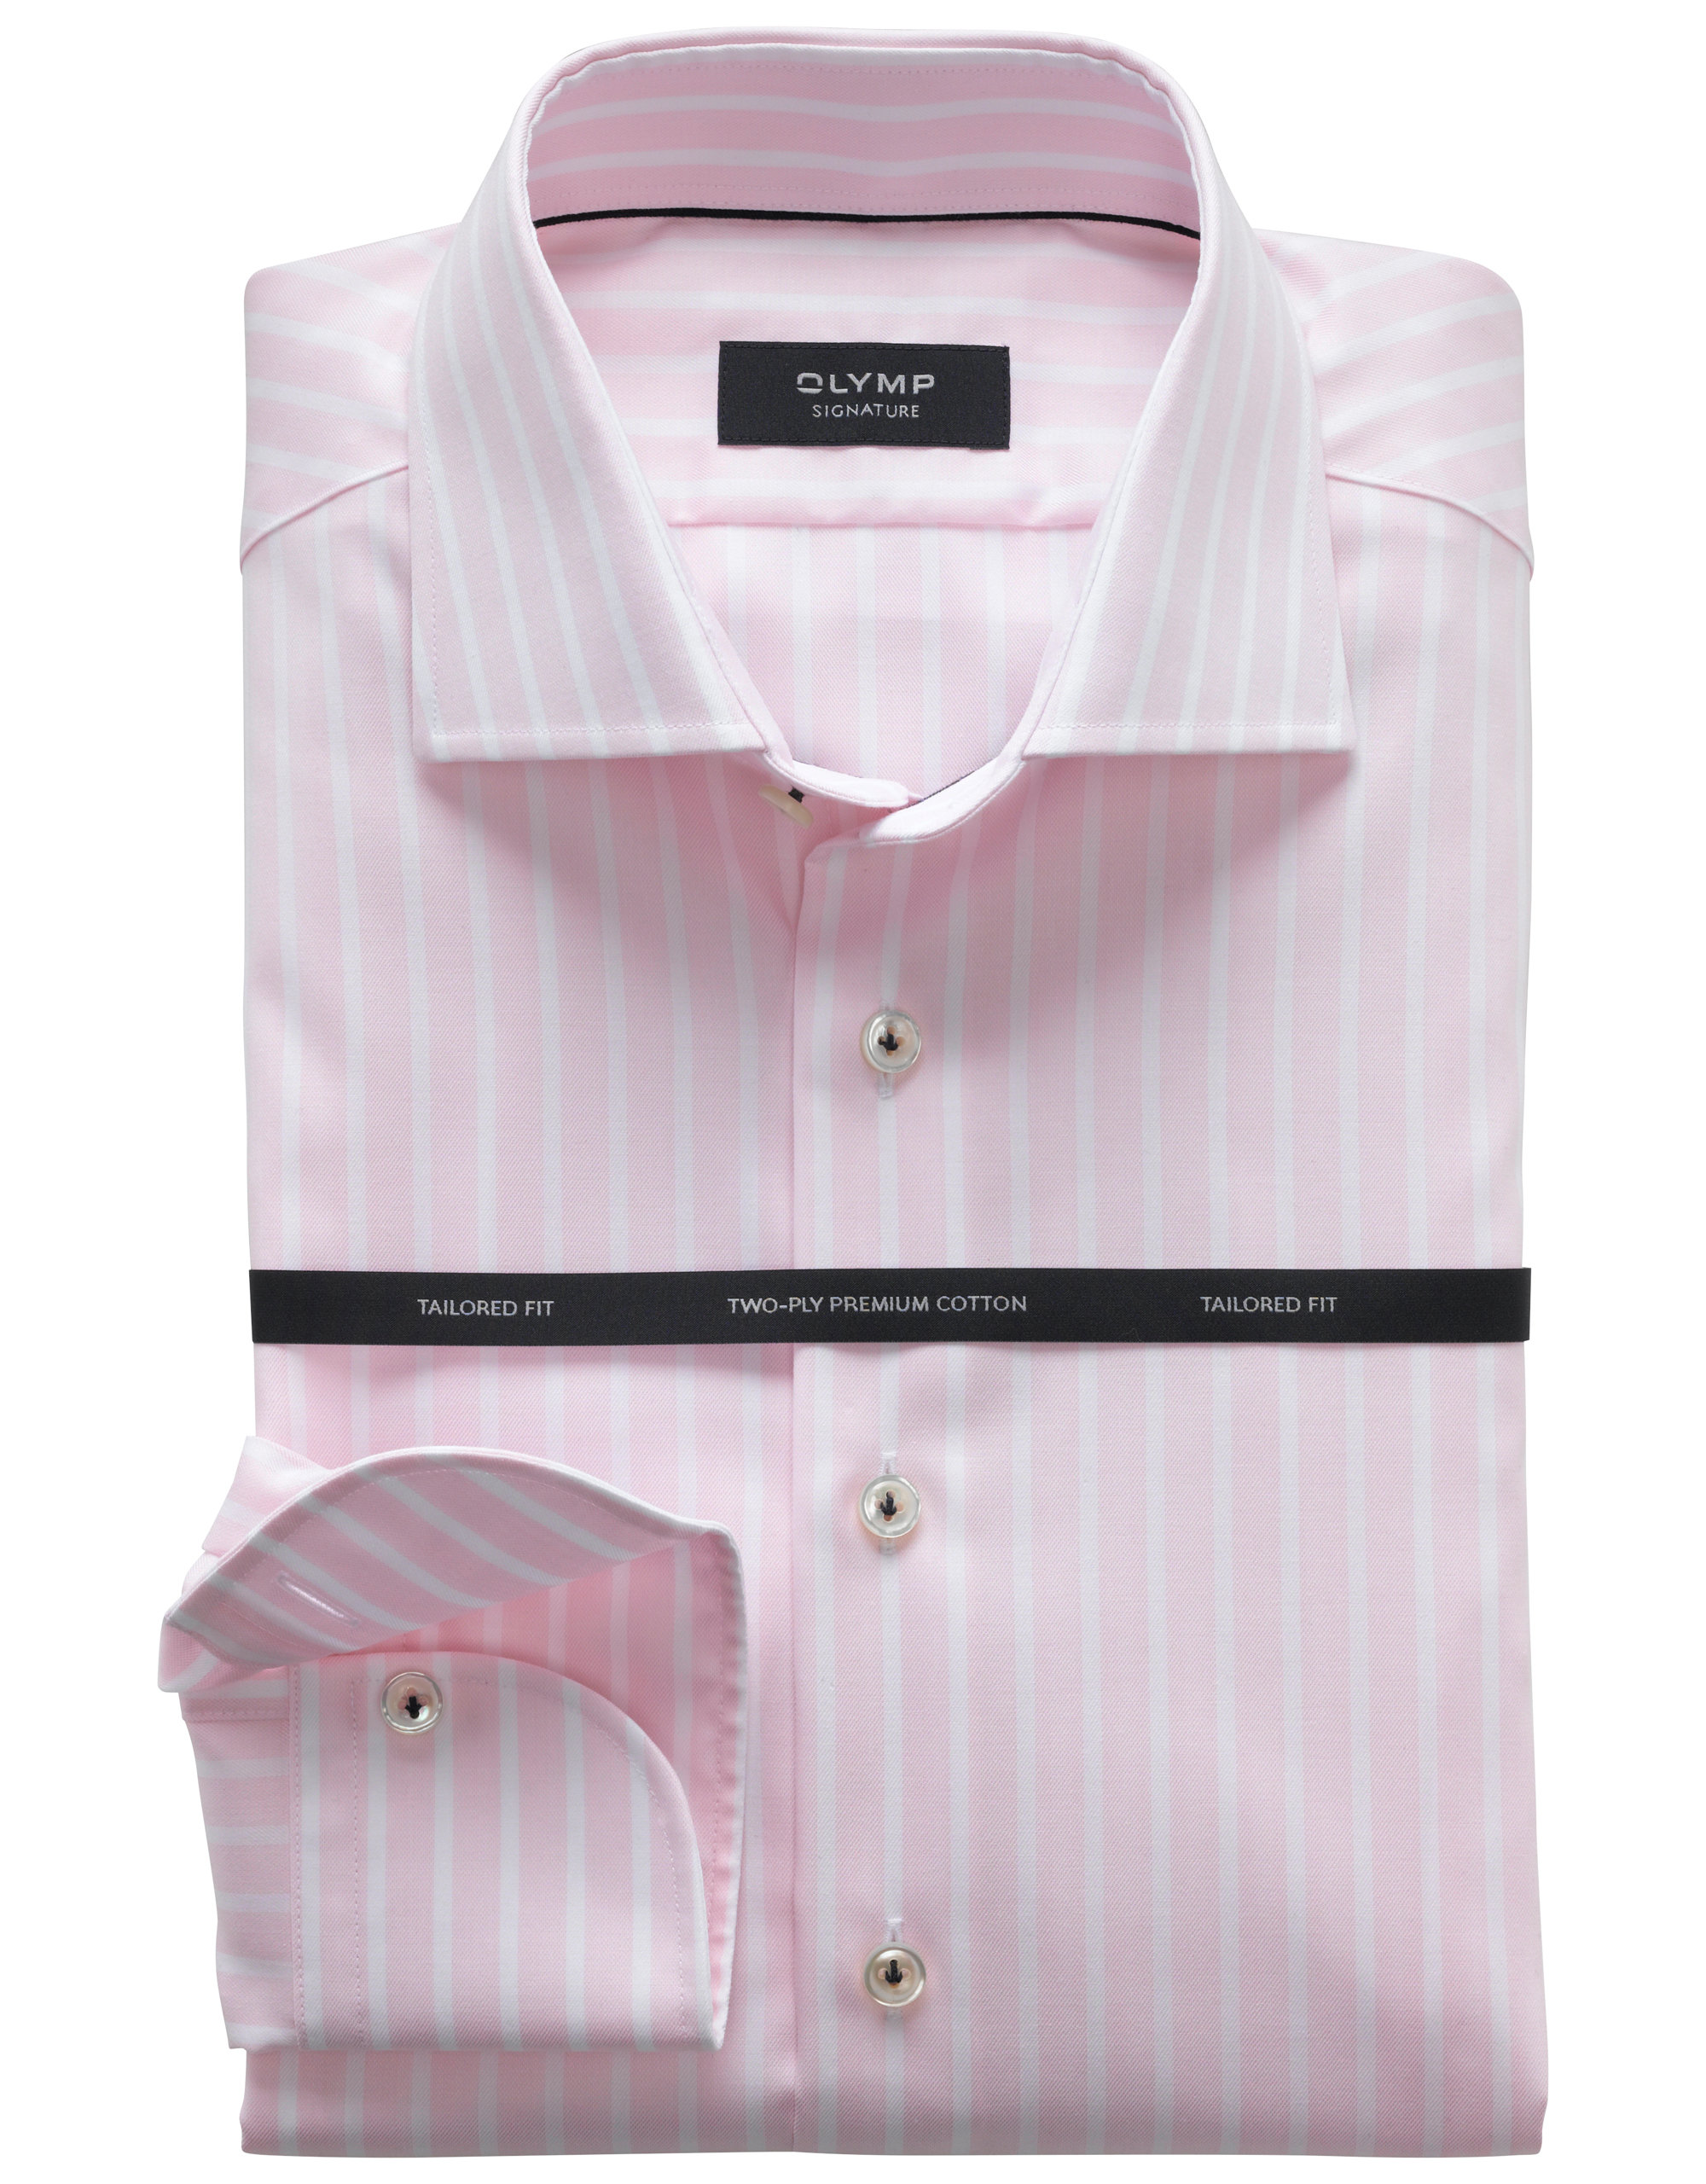 OLYMP_SIGNATURE__Tailored_Fit__SIGNATURE_Kent__Pink